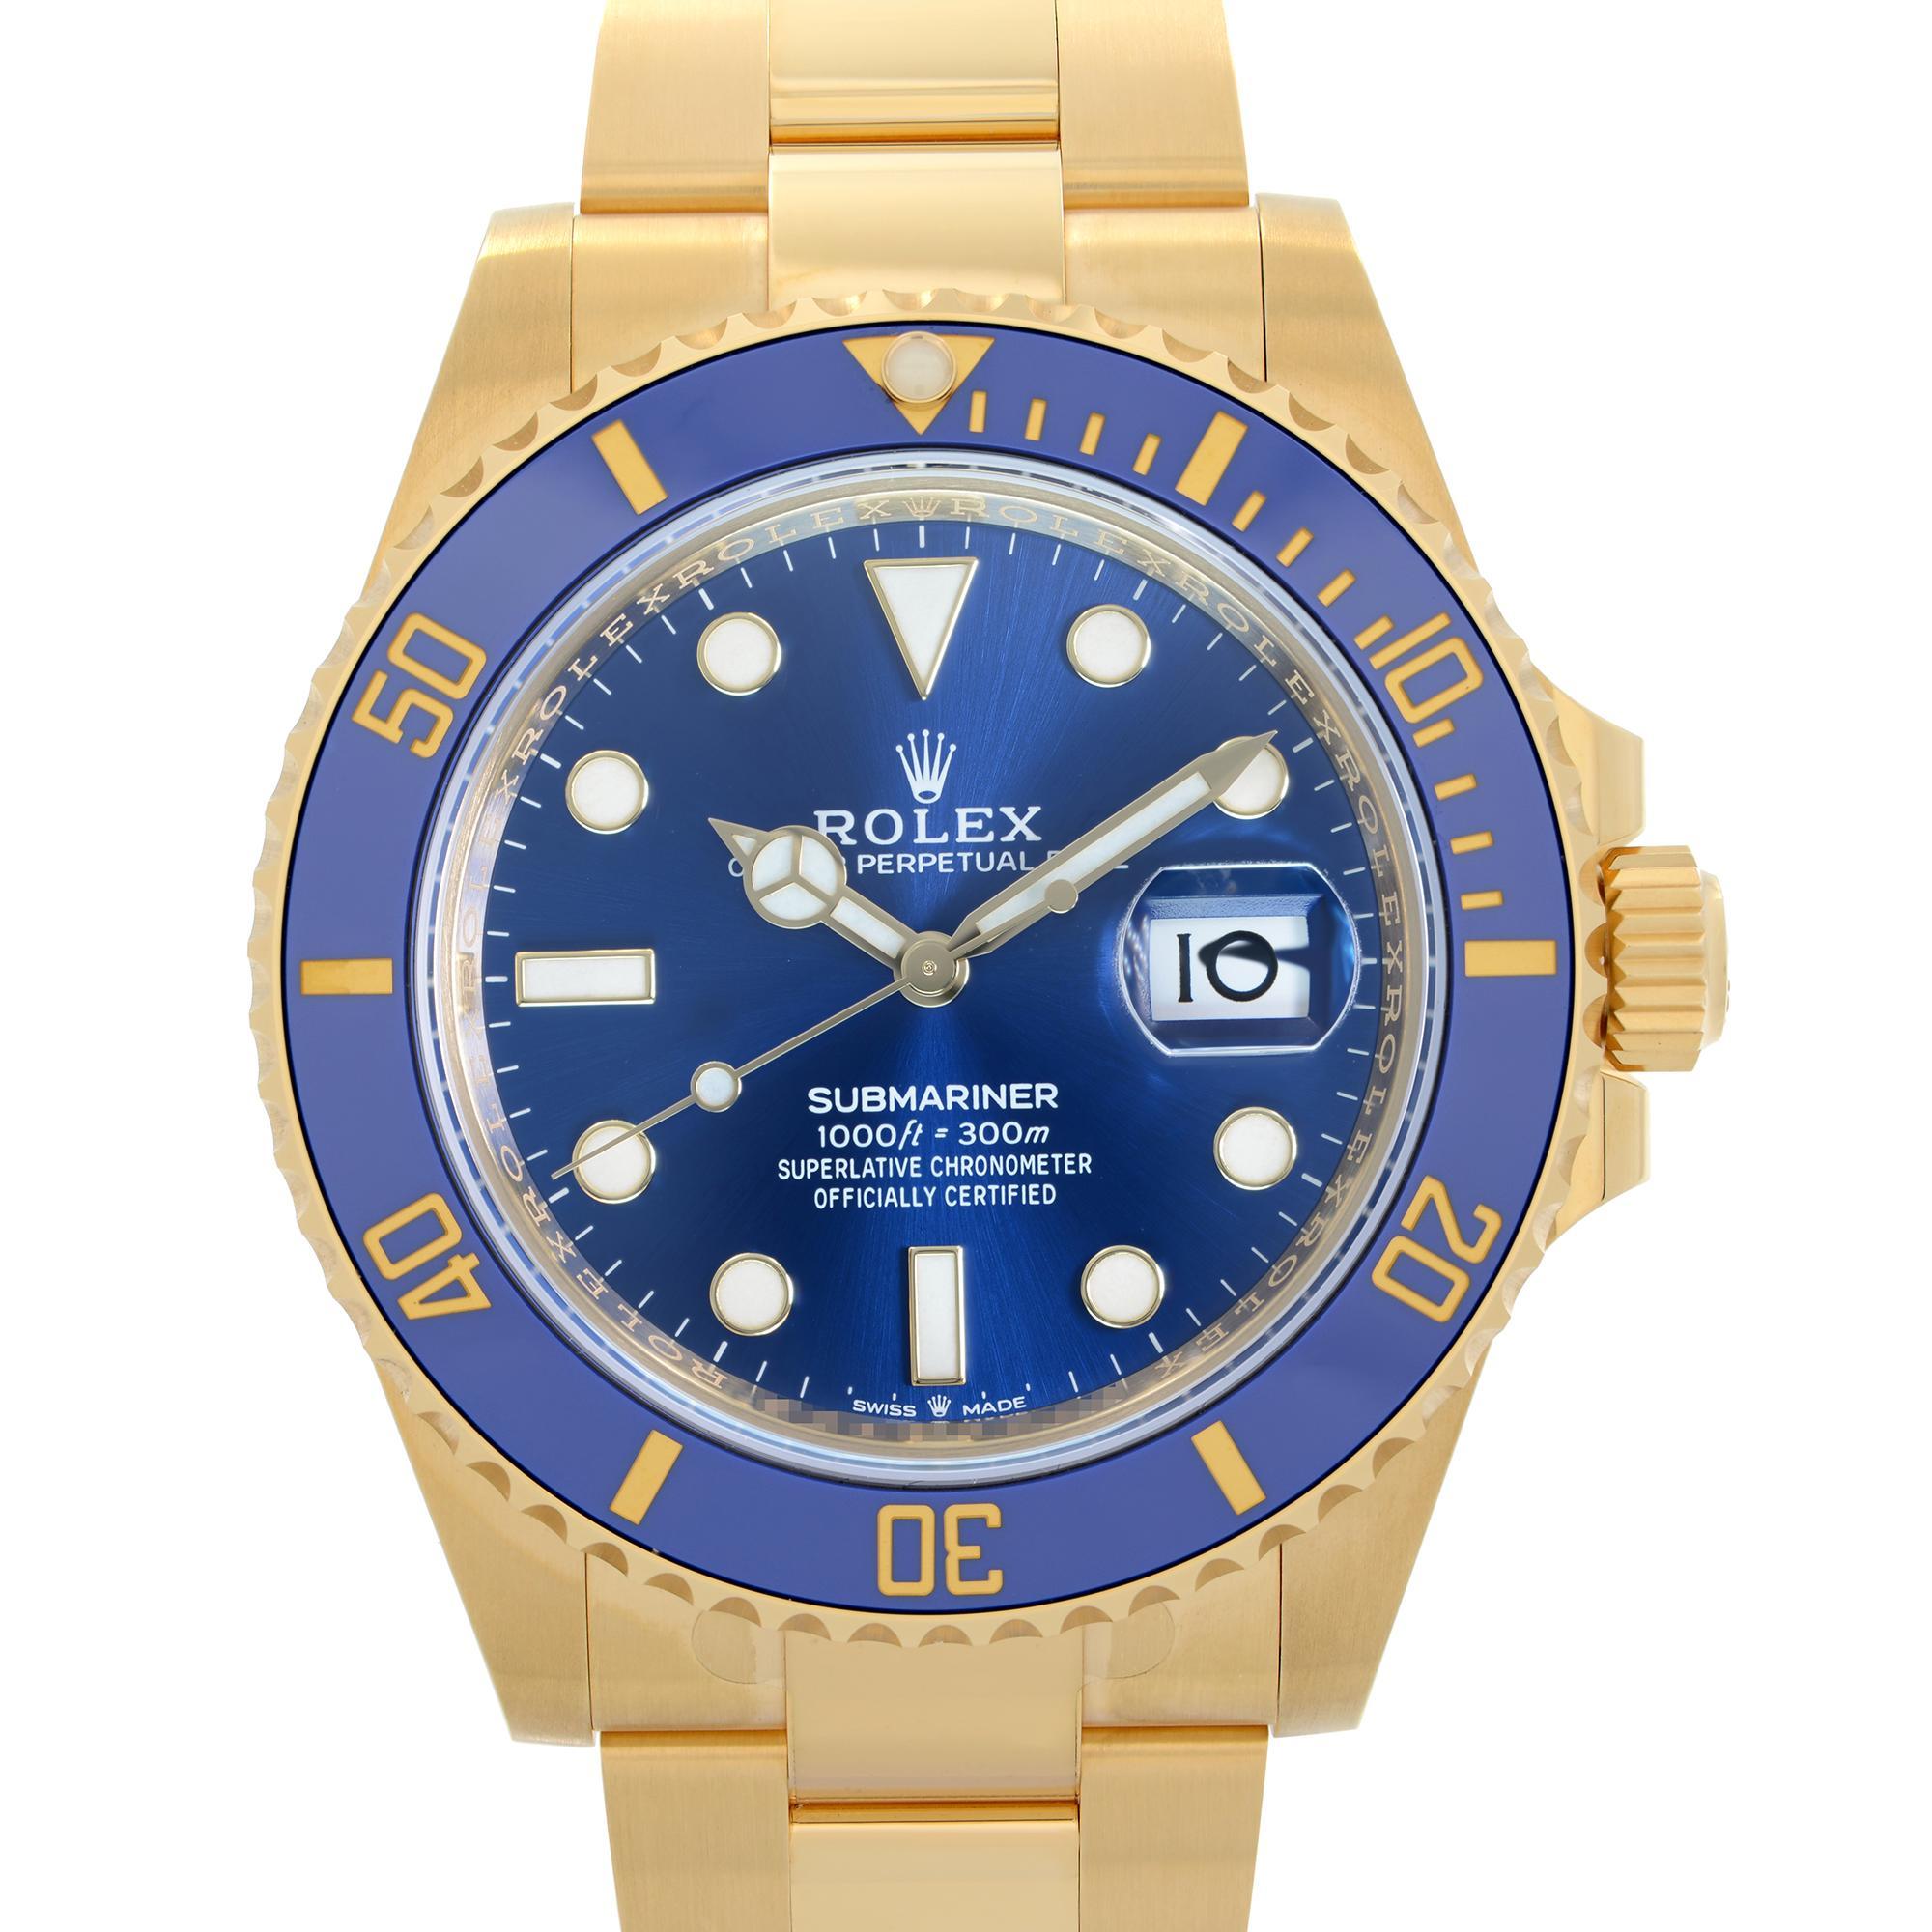 Unworn Rolex Submariner 18K Yellow Gold Black Dial Automatic Men's Watch 126618LNBKSO. Original Box and Papers are Included.

* Free Shipping within the USA
* Five-year warranty coverage
* 14-day return policy with a full refund. Buyers can verify